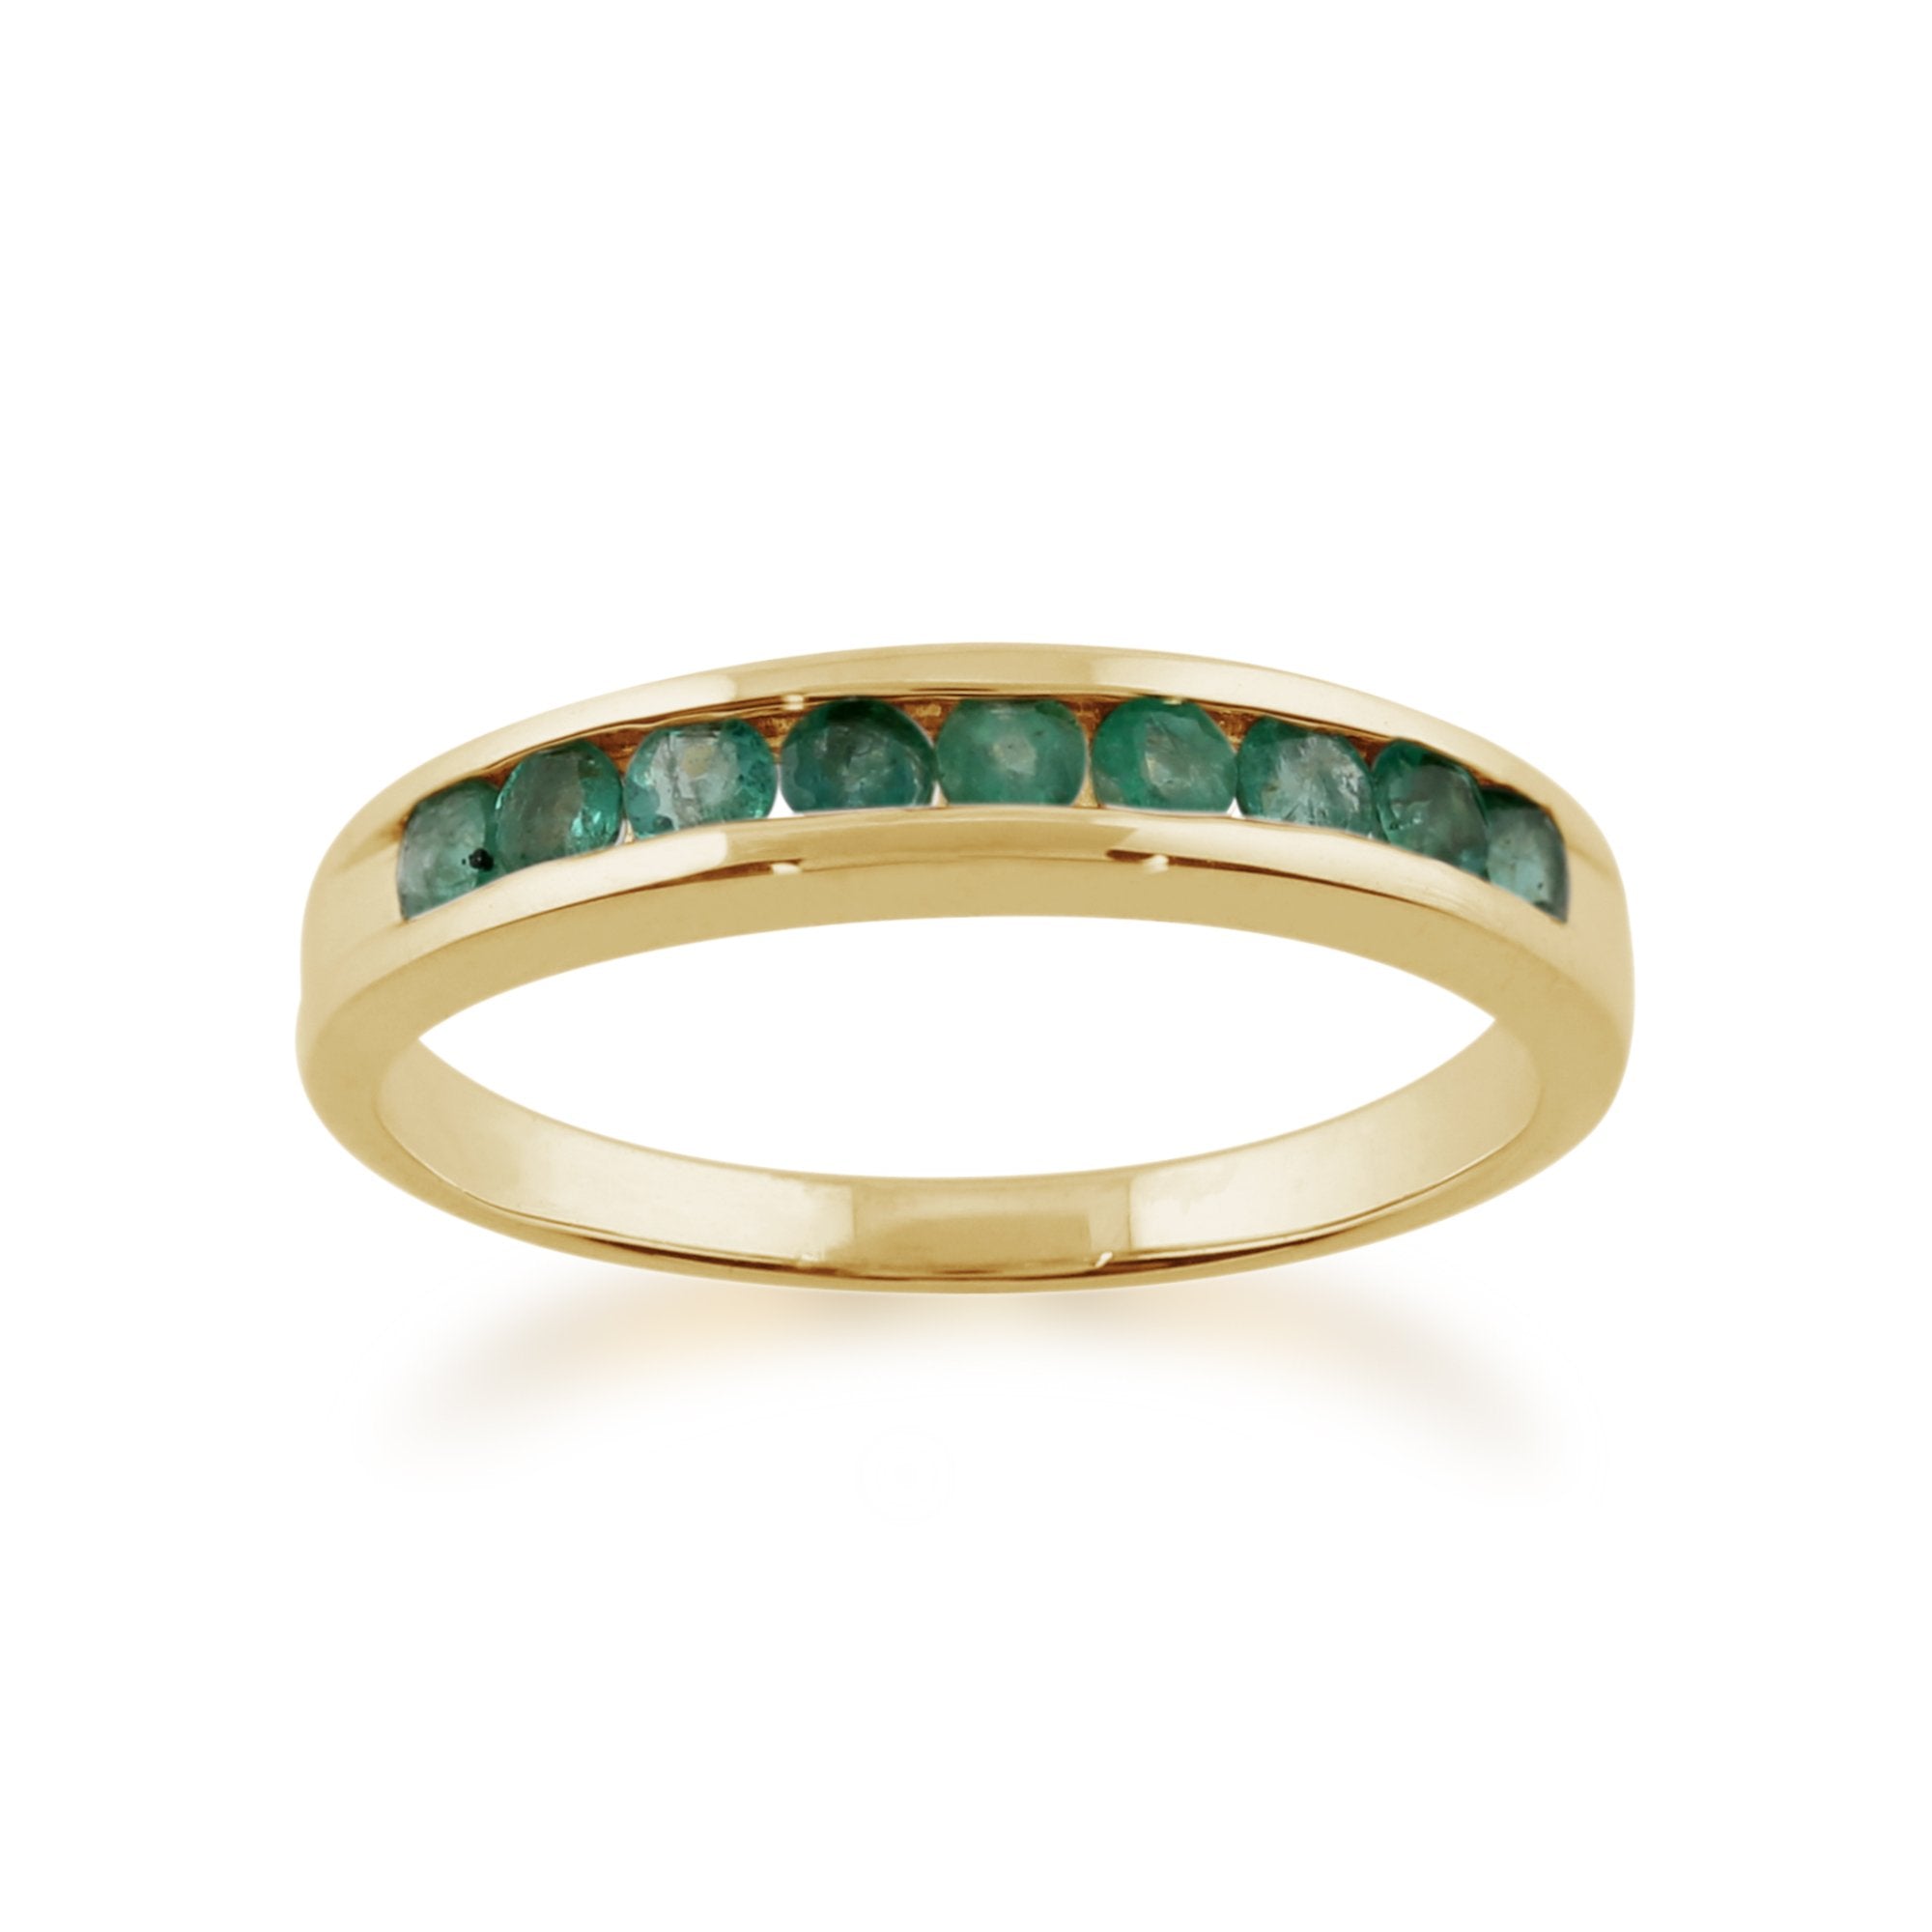 Channel Set 0.44ct Round Emerald Ring in 9ct Yellow Gold